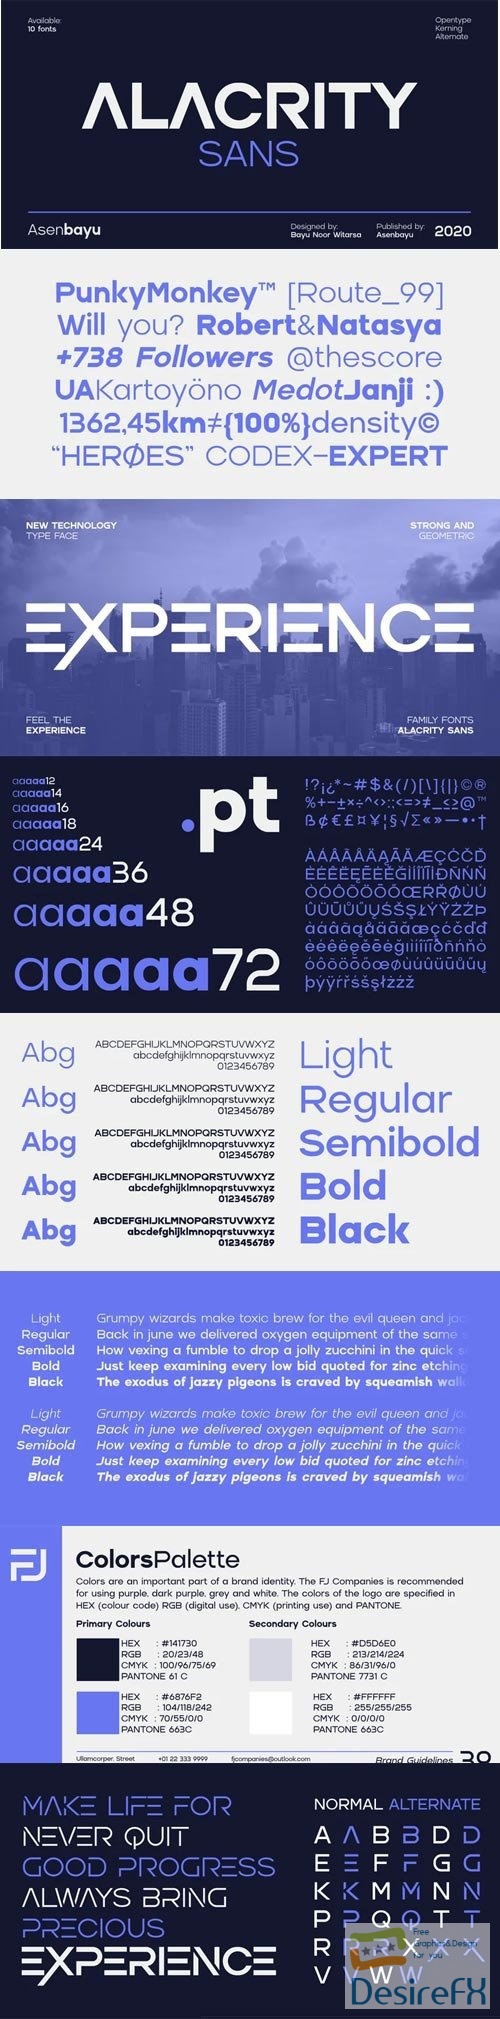 Alacrity Sans Serif Font Family 10-Weights